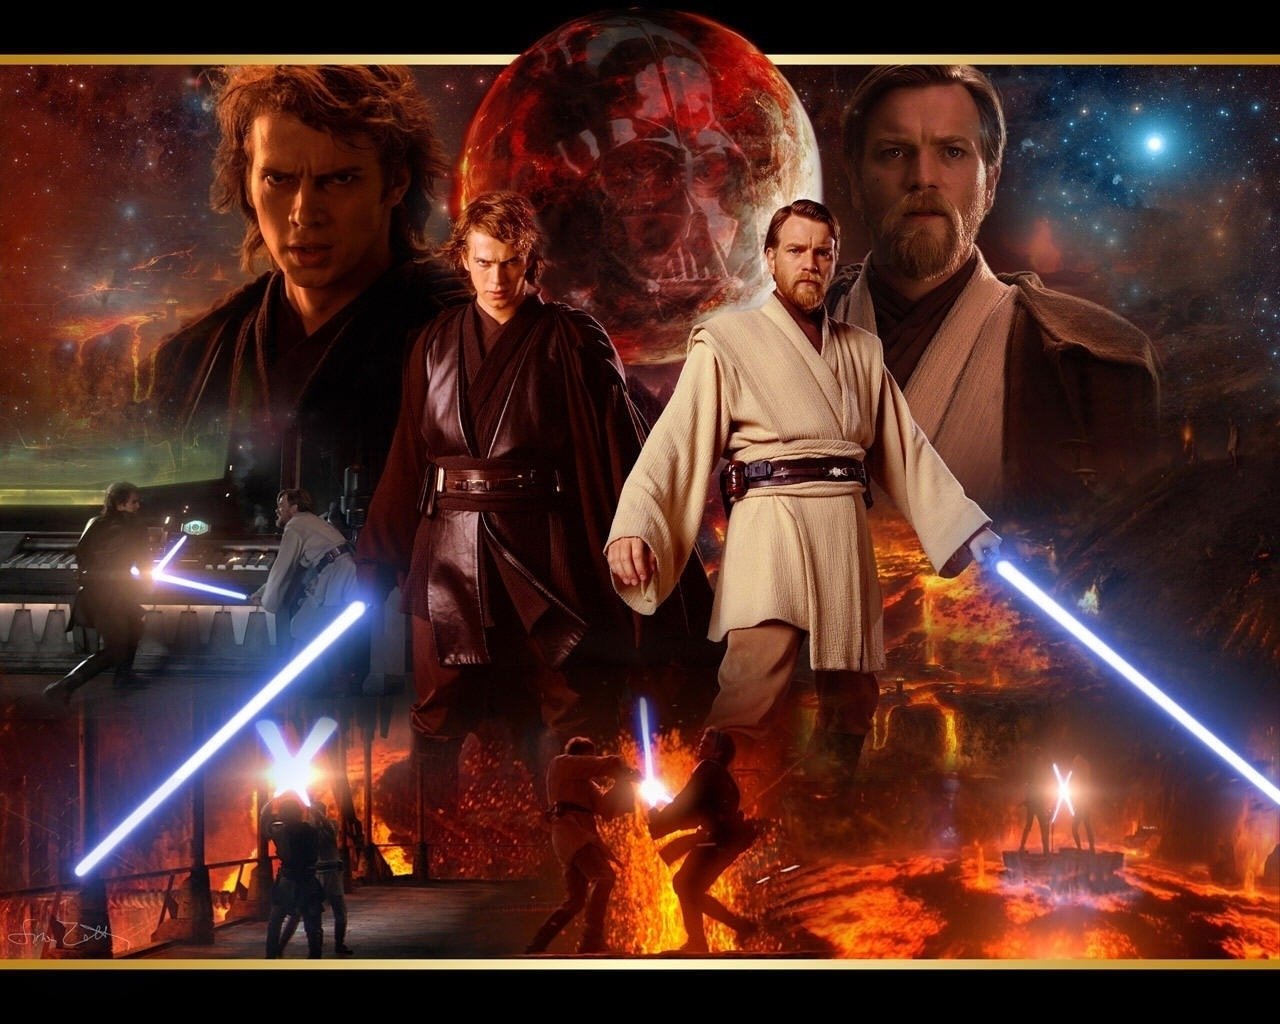 Star Wars Ep. III: Revenge of the Sith instal the new